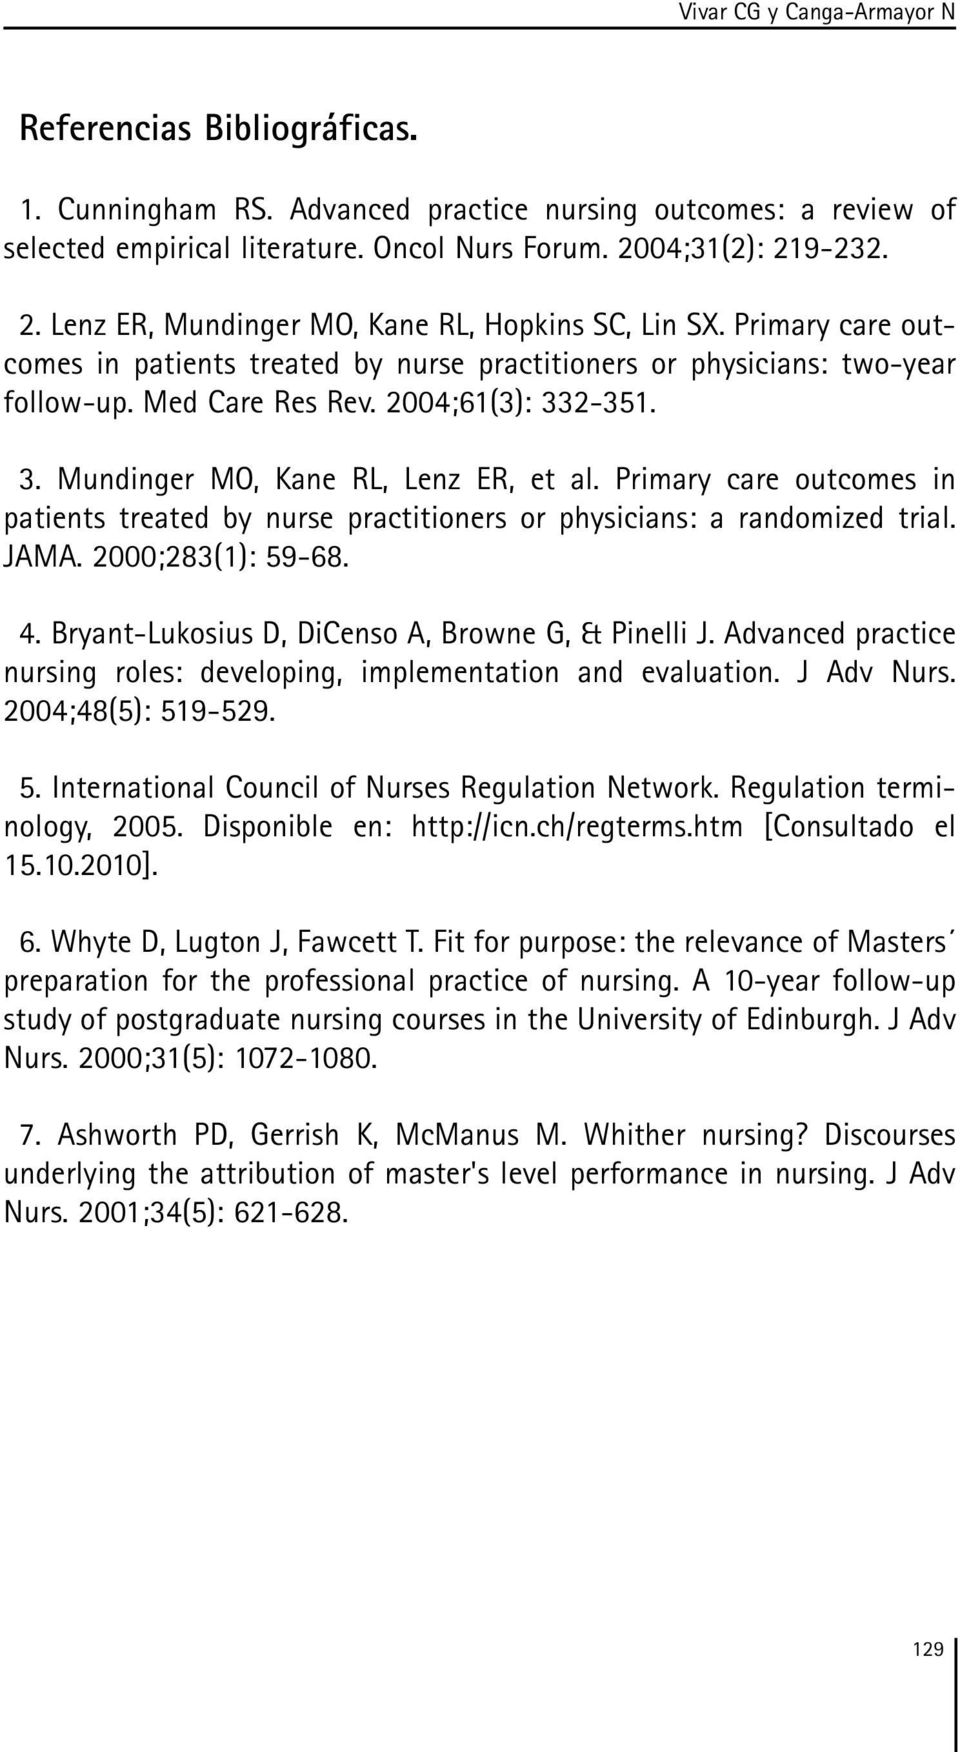 2004;61(3): 332-351. 3. Mundinger MO, Kane RL, Lenz ER, et al. Primary care outcomes in patients treated by nurse practitioners or physicians: a randomized trial. JAMA. 2000;283(1): 59-68. 4.